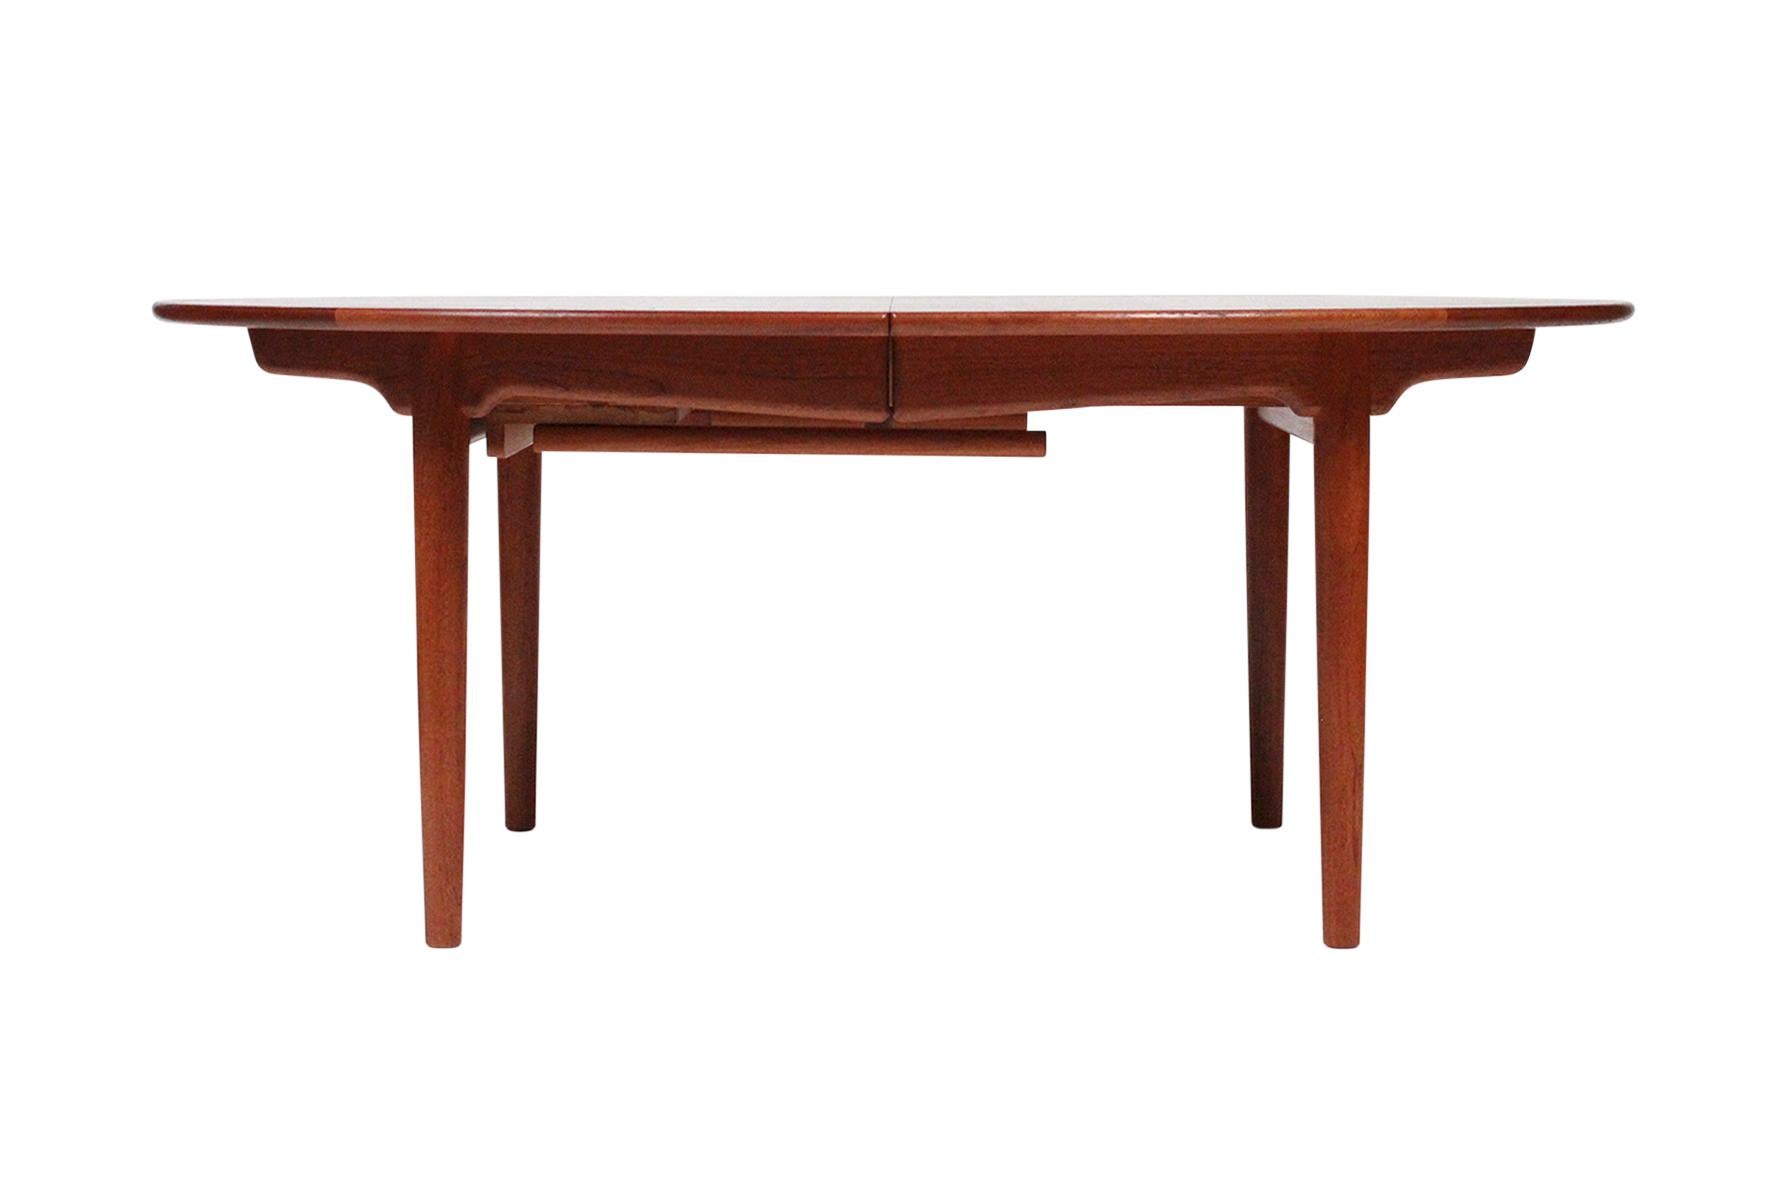 Very rare and large dining table with a solid teak top and oak legs, model JH-567 designed by Hans Wegner. Produced by cabinetmaker Johannes Hansen in Denmark. Three interlocking leaves are removable, when fully extended seats 12-14 people. This